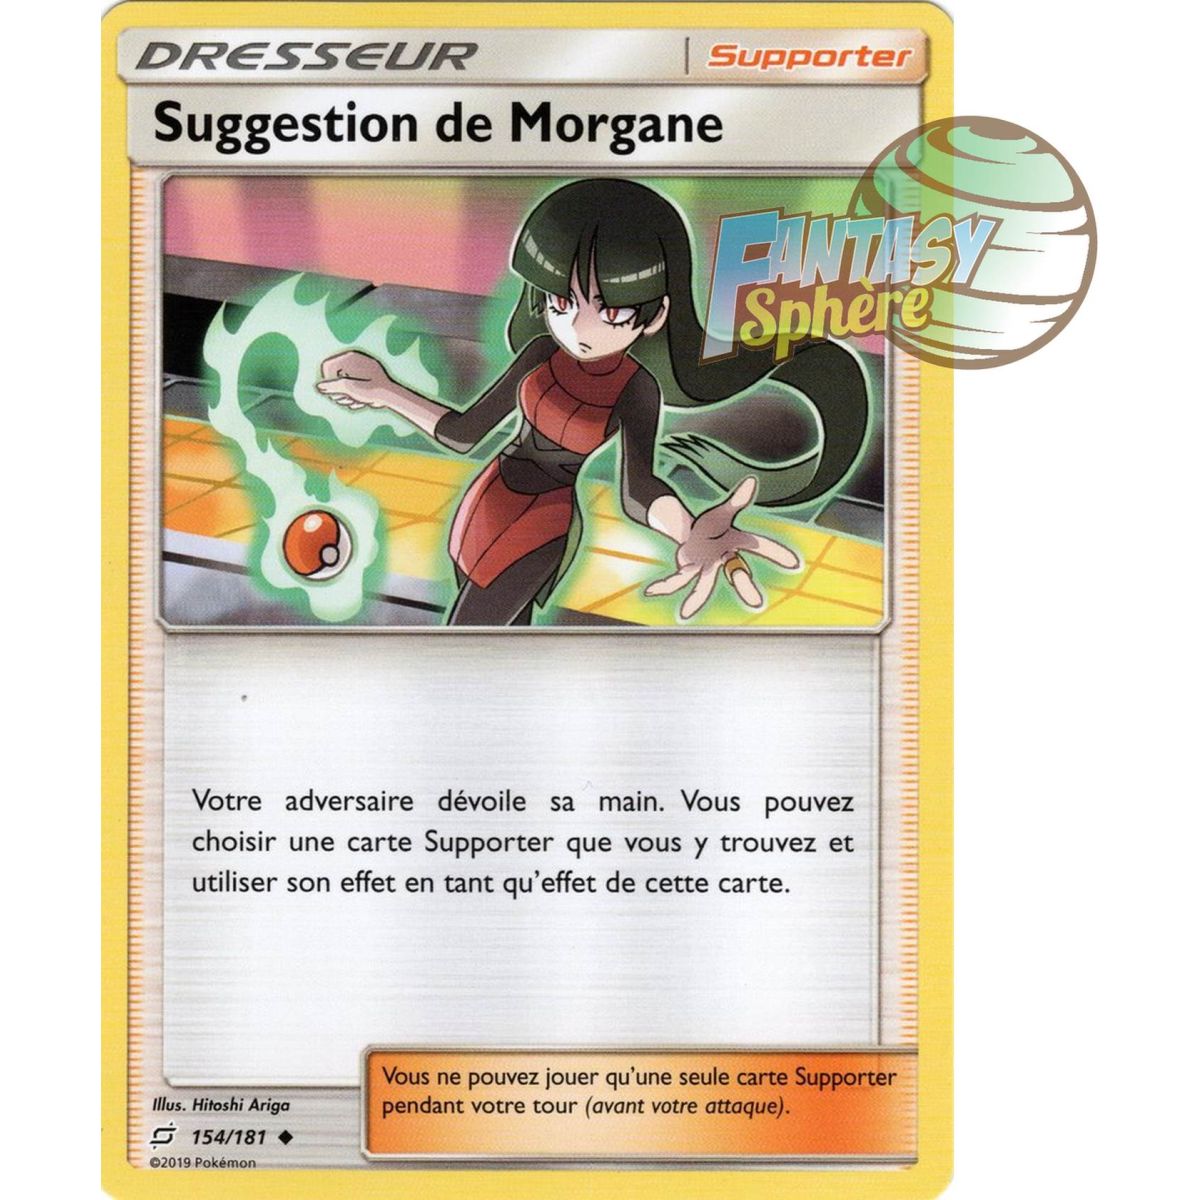 Morgane's suggestion - Uncommon 154/181 - Sun and Moon 9 Shock Duo